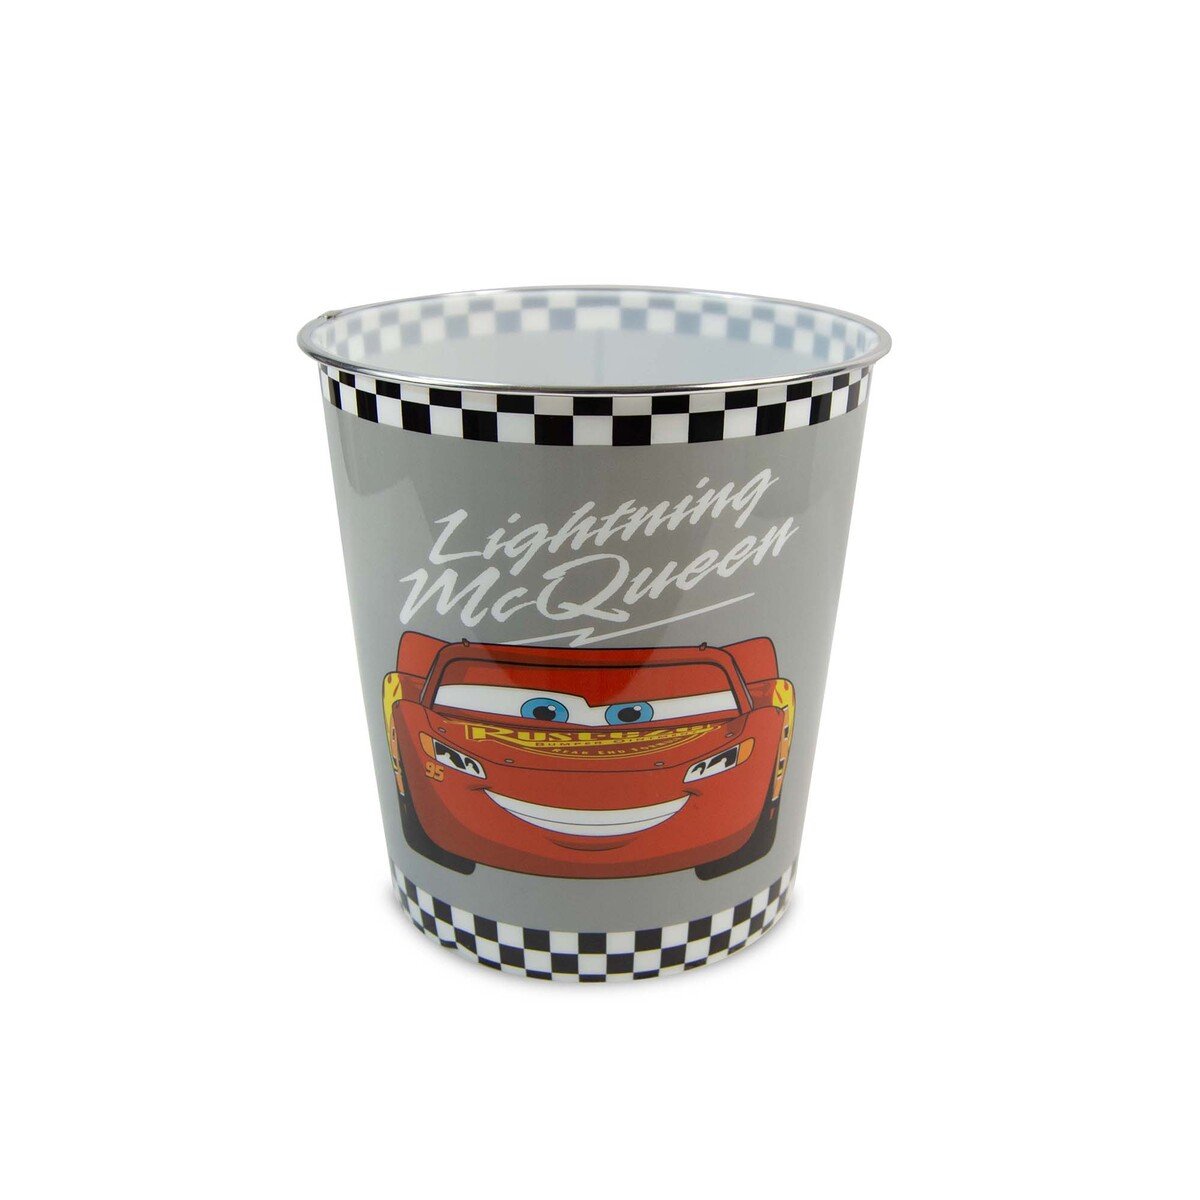 Cars Disney Cars Lightning McQueen Compact Waste Basket For Kid's Bedroom, 23x24 cm, Multicolored, TRHA10494